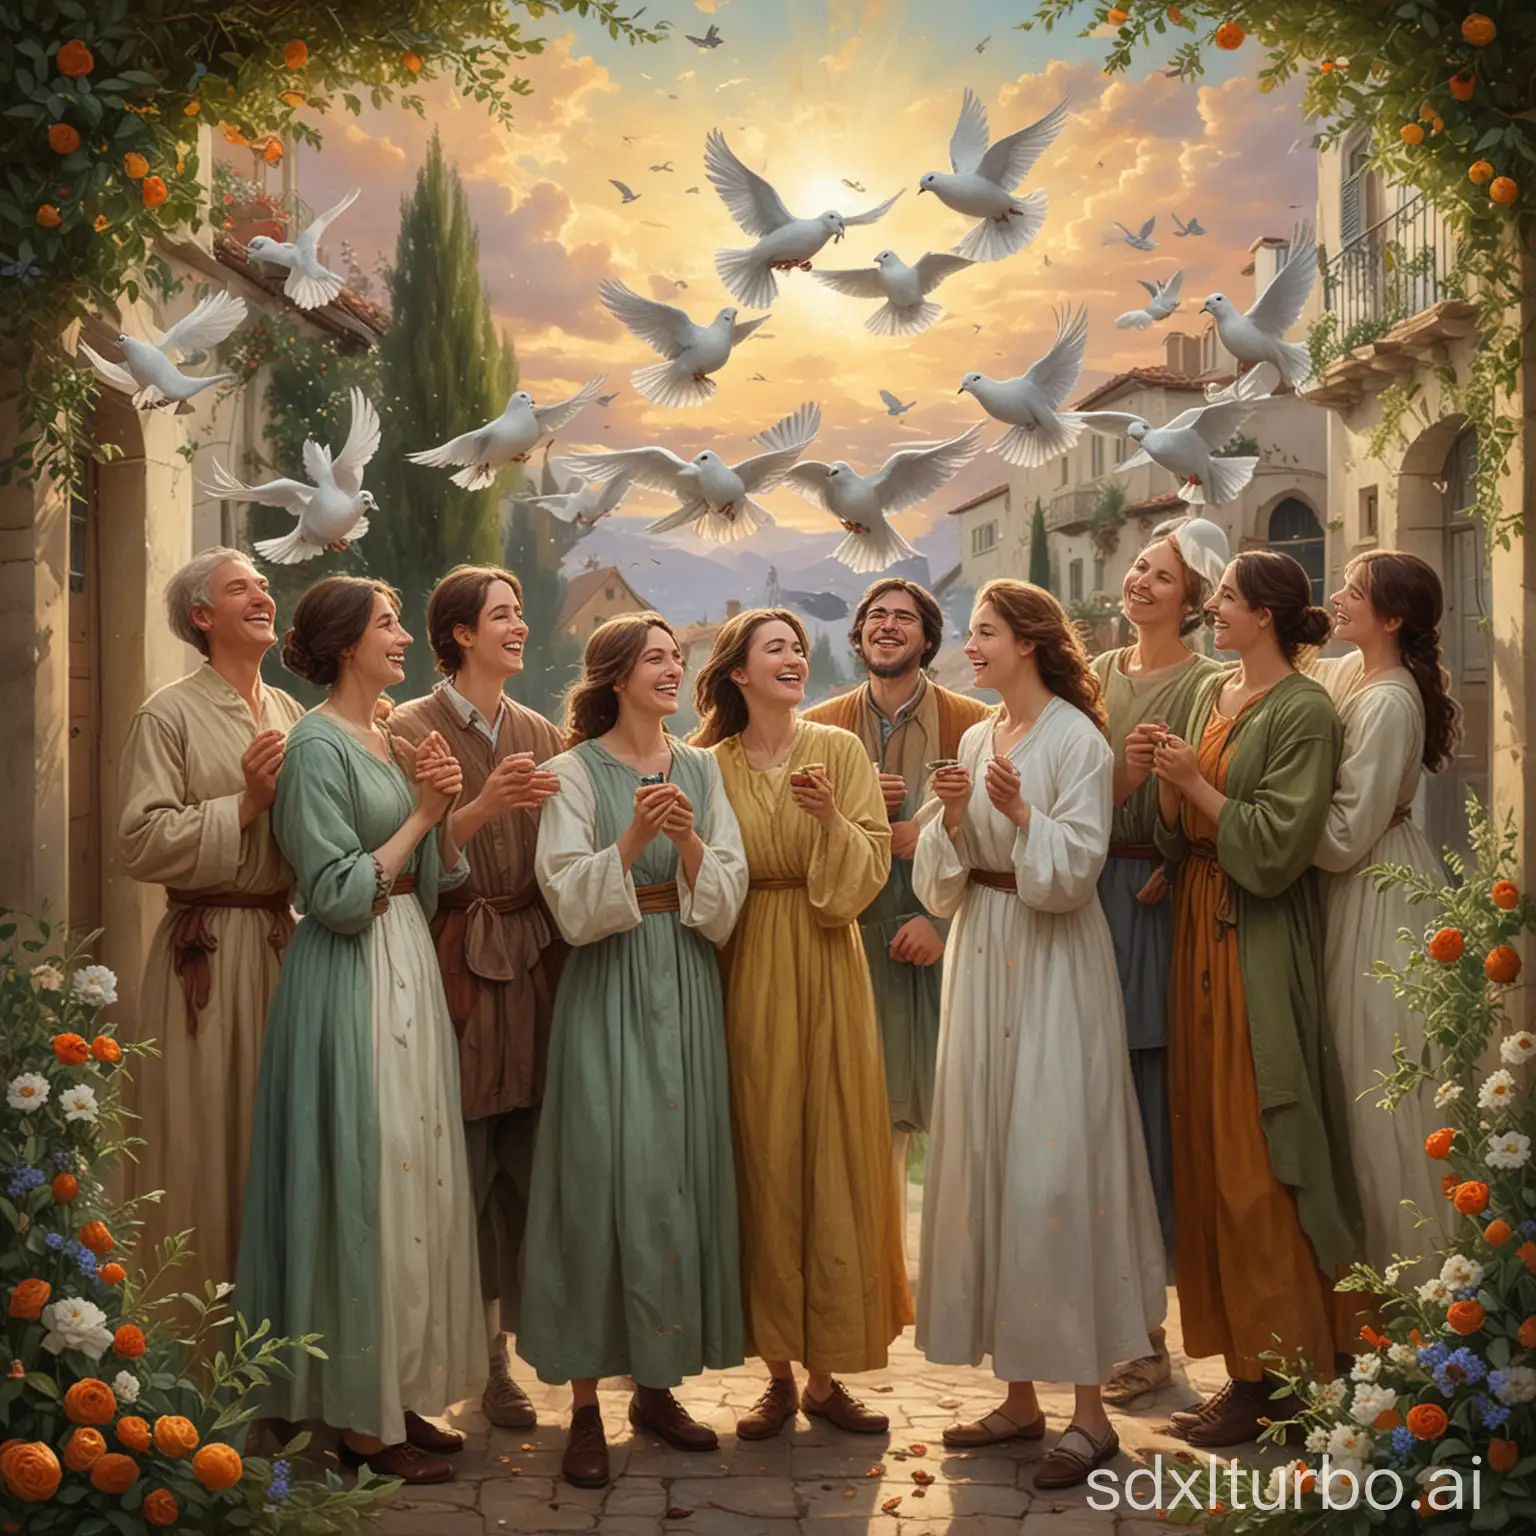 The ESFJ, known as the Supporter and the Creator of Harmony, brings comfort and support to those around them with a warm smile, soft attire, and open embrace. In this painting, the ESFJ is dressed in cozy attire suitable for a family gathering, holding an olive branch symbolizing peace and unity, standing amidst laughter and joy-filled family and friends. They are gathered around the ESFJ, sharing stories, laughter, and joy, reflecting the harmony and unity brought by the ESFJ. In the background, doves fly across the sky, further emphasizing the theme of harmony.